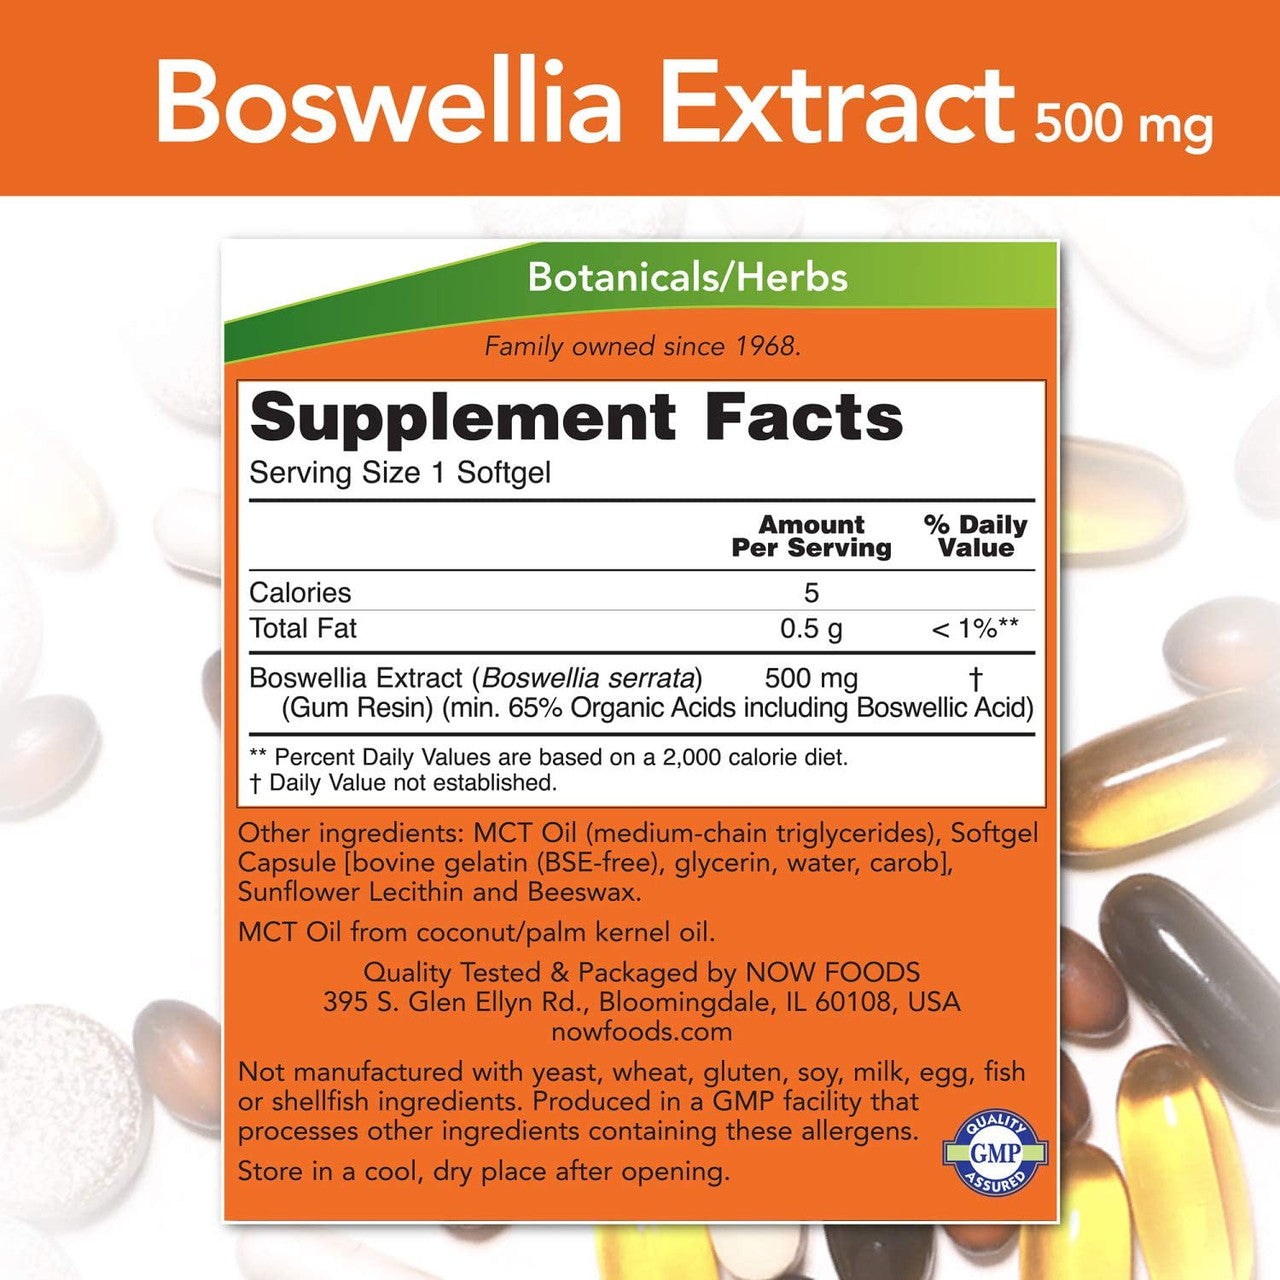 Now Boswellia Extract 500mg supplement facts